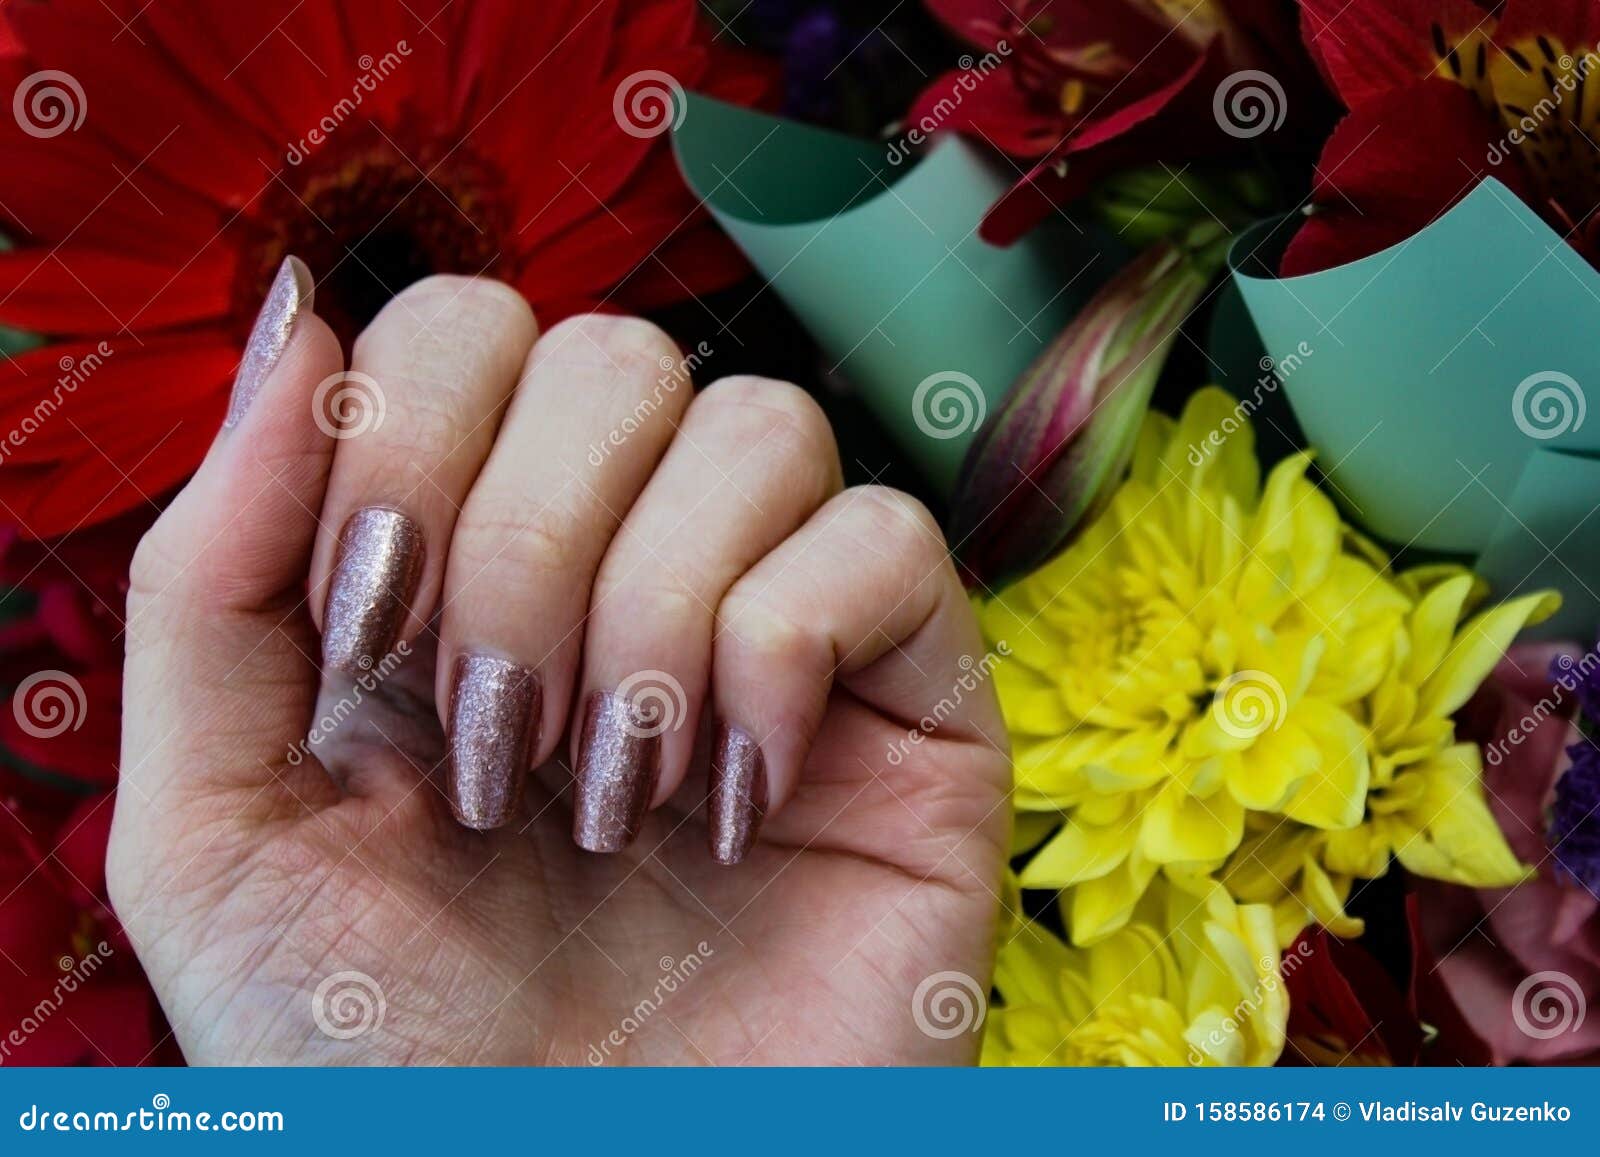 shiny sparkling nude nails on the background of multi-colored colorful flow...